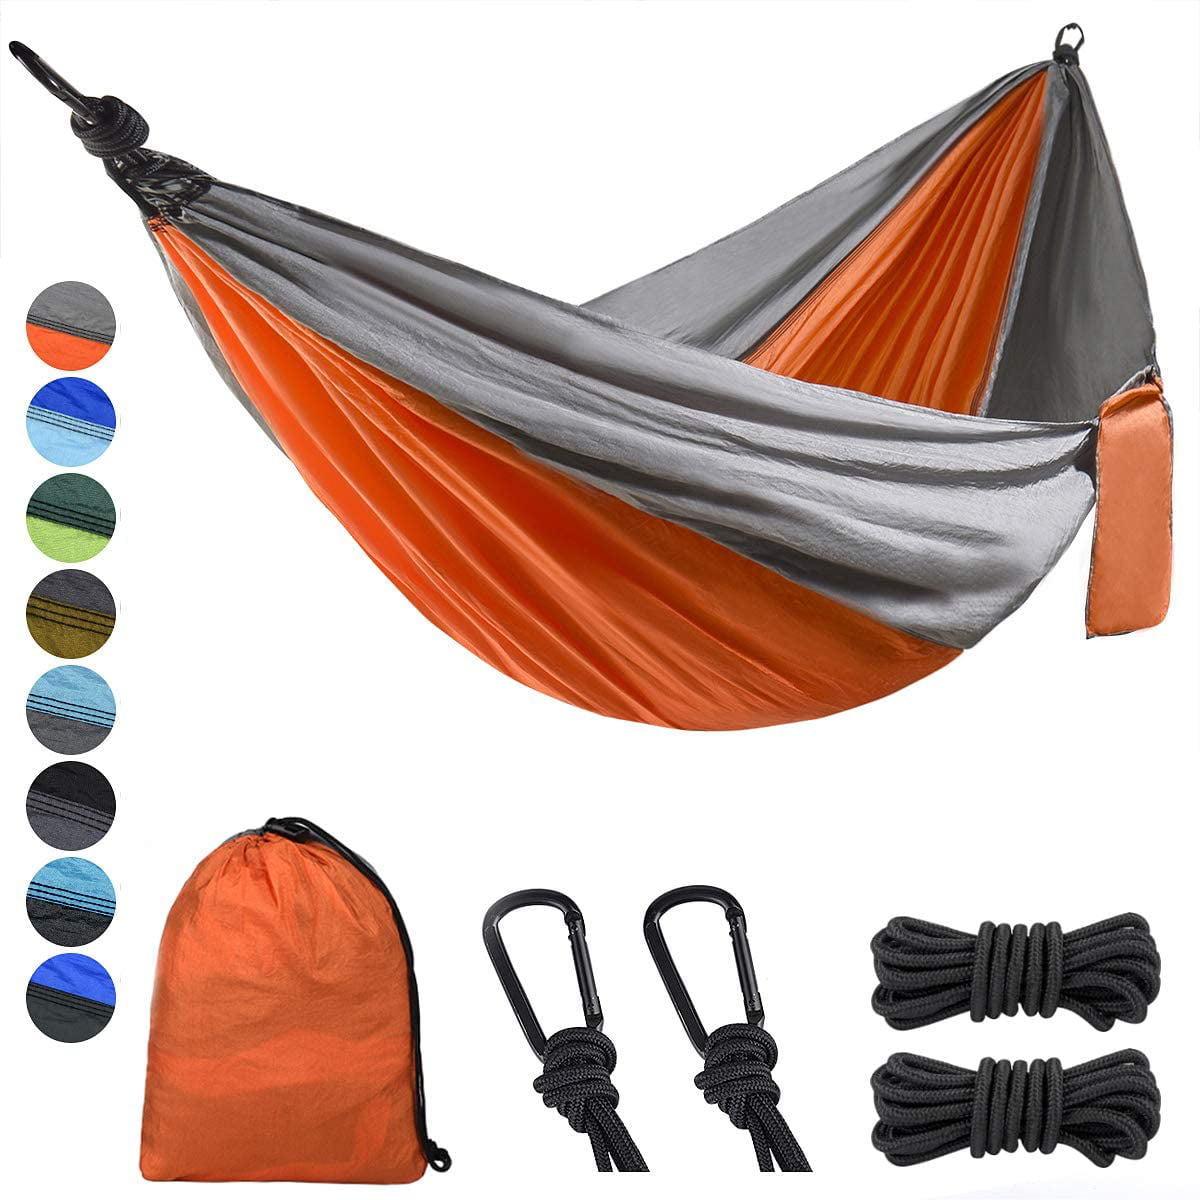 Lifeleads Camping Hammock-Nylon Double and Single Portable Parachute Lightweight for Outdoor or Indoor Backpacking Travel Hiking 